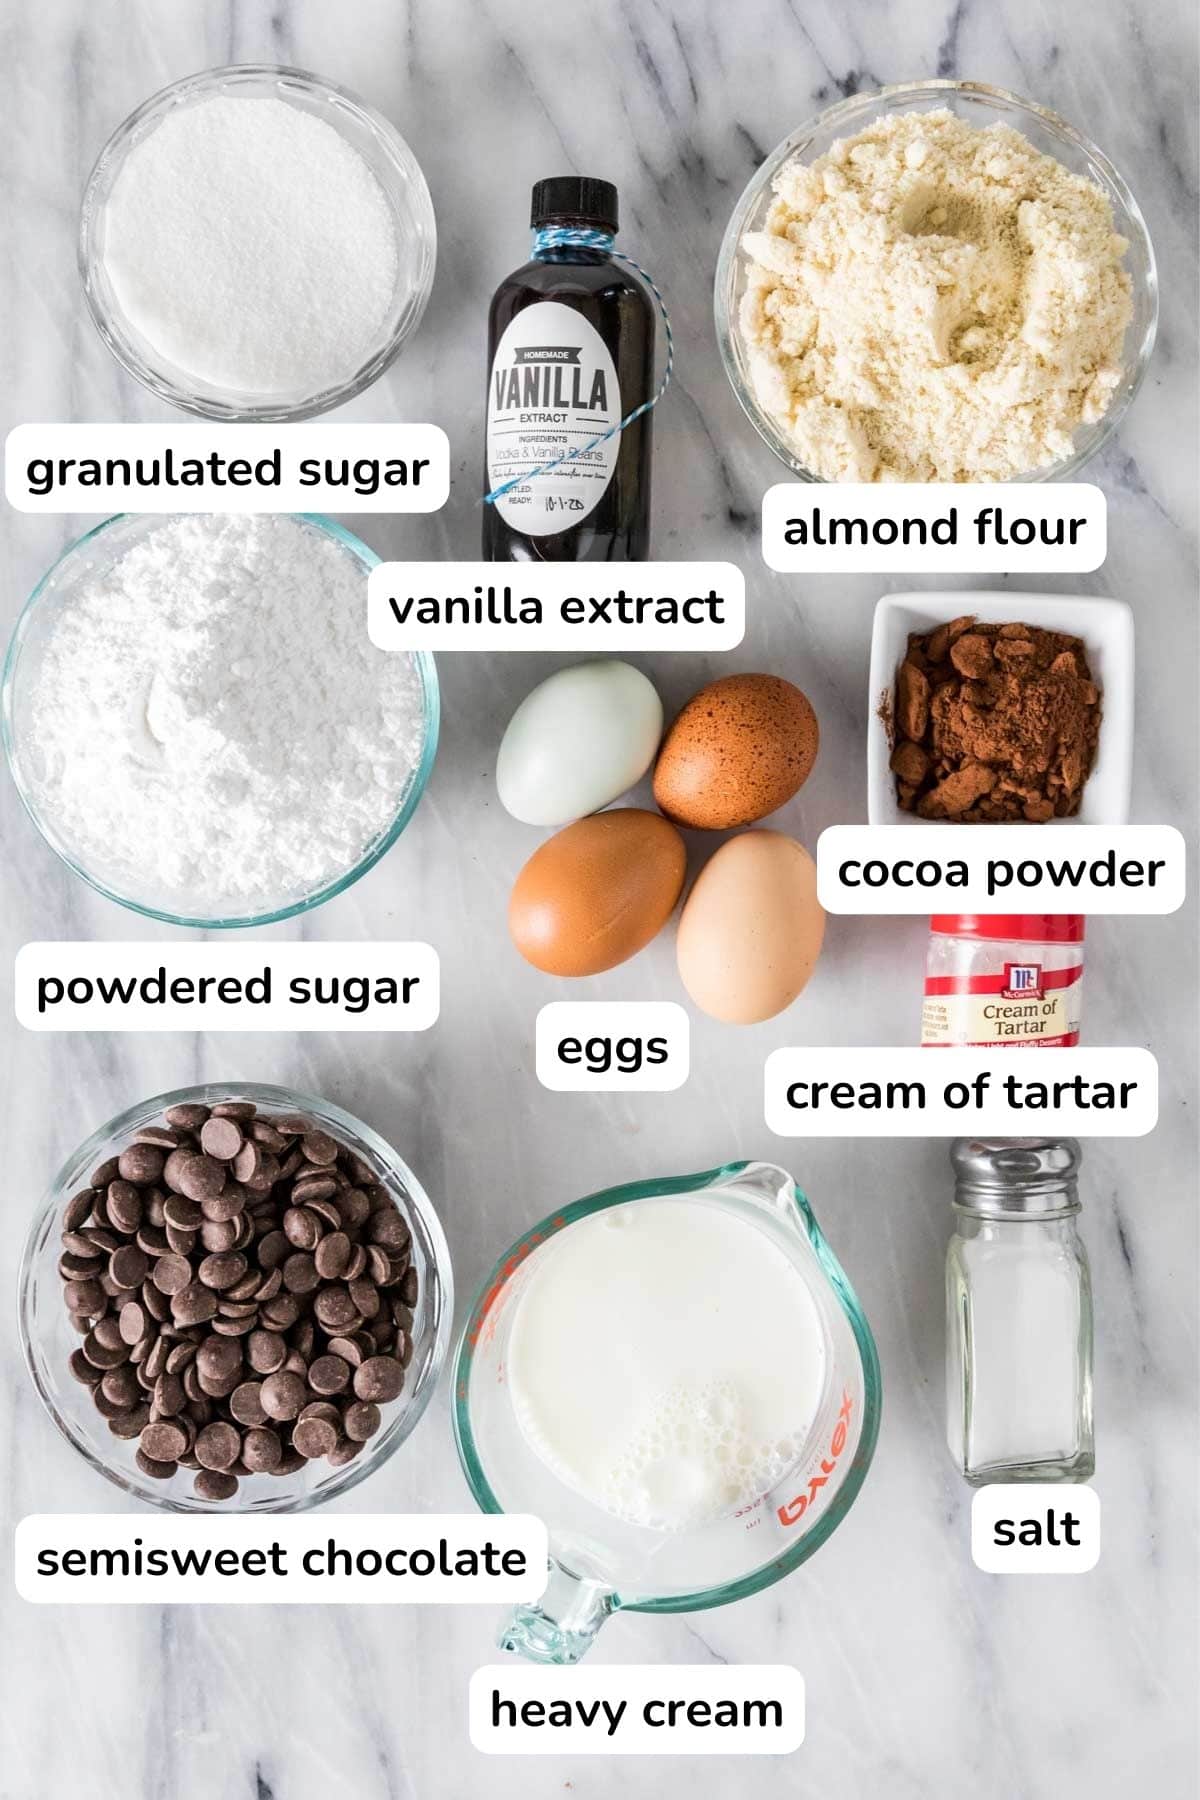 Overhead view of ingredients with labels including cream of tartar, almond flour, egg whites, and more.